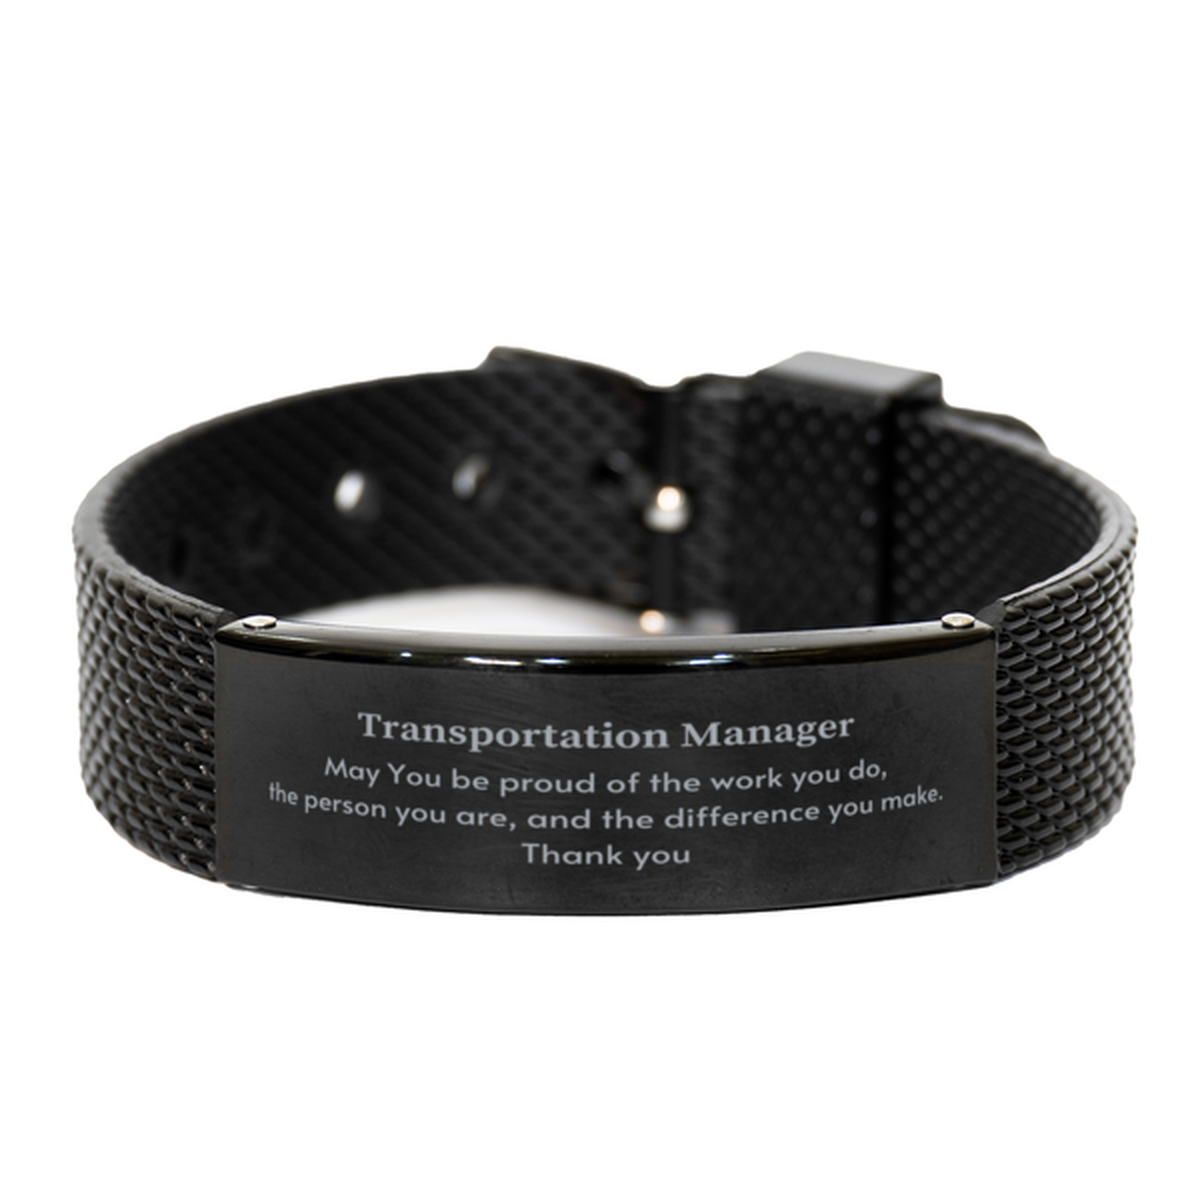 Heartwarming Black Shark Mesh Bracelet Retirement Coworkers Gifts for Transportation Manager, Transportation Manager May You be proud of the work you do, the person you are Gifts for Boss Men Women Friends